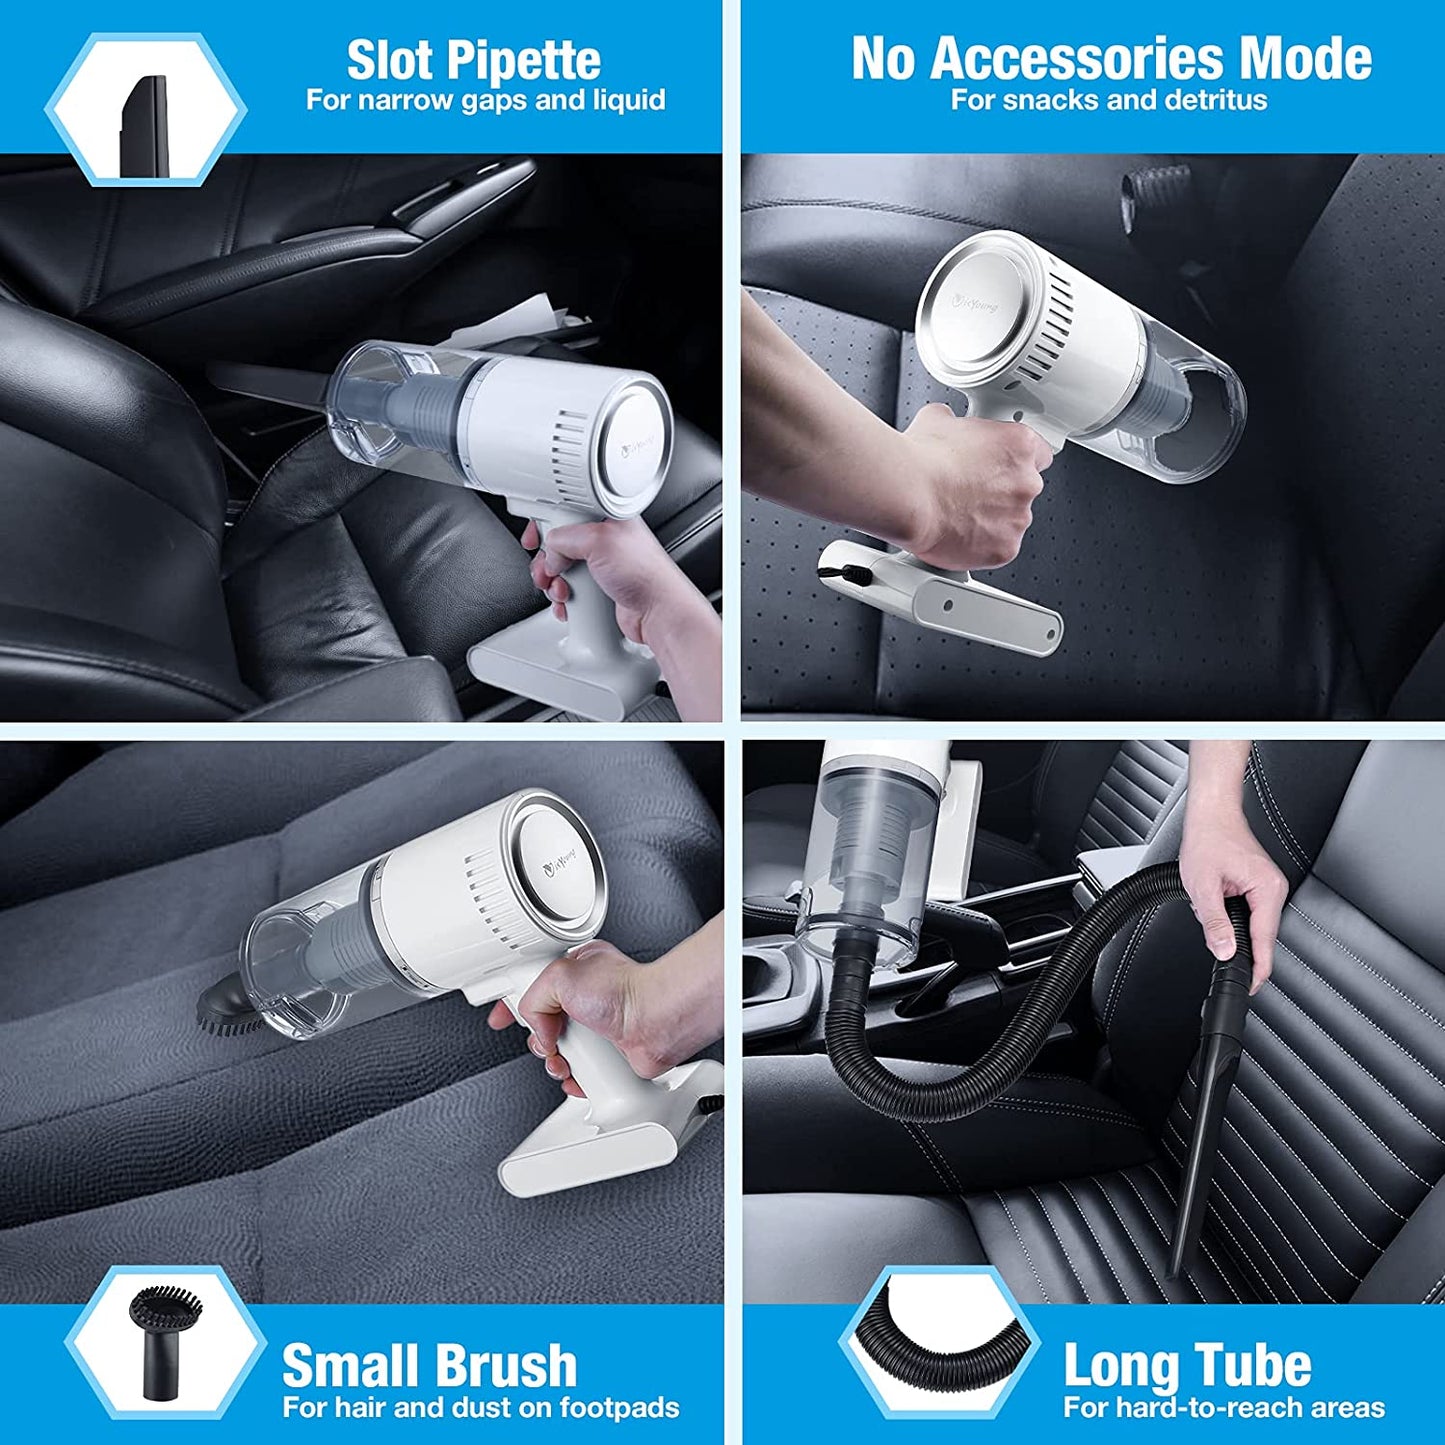 Car Vacuum Cleaner, 6500PA Corded Handheld Vacuum, 12.46 Foot Cable Auto Dust Buster, Car & Auto Accessories Kit for Cleaning Car Interior